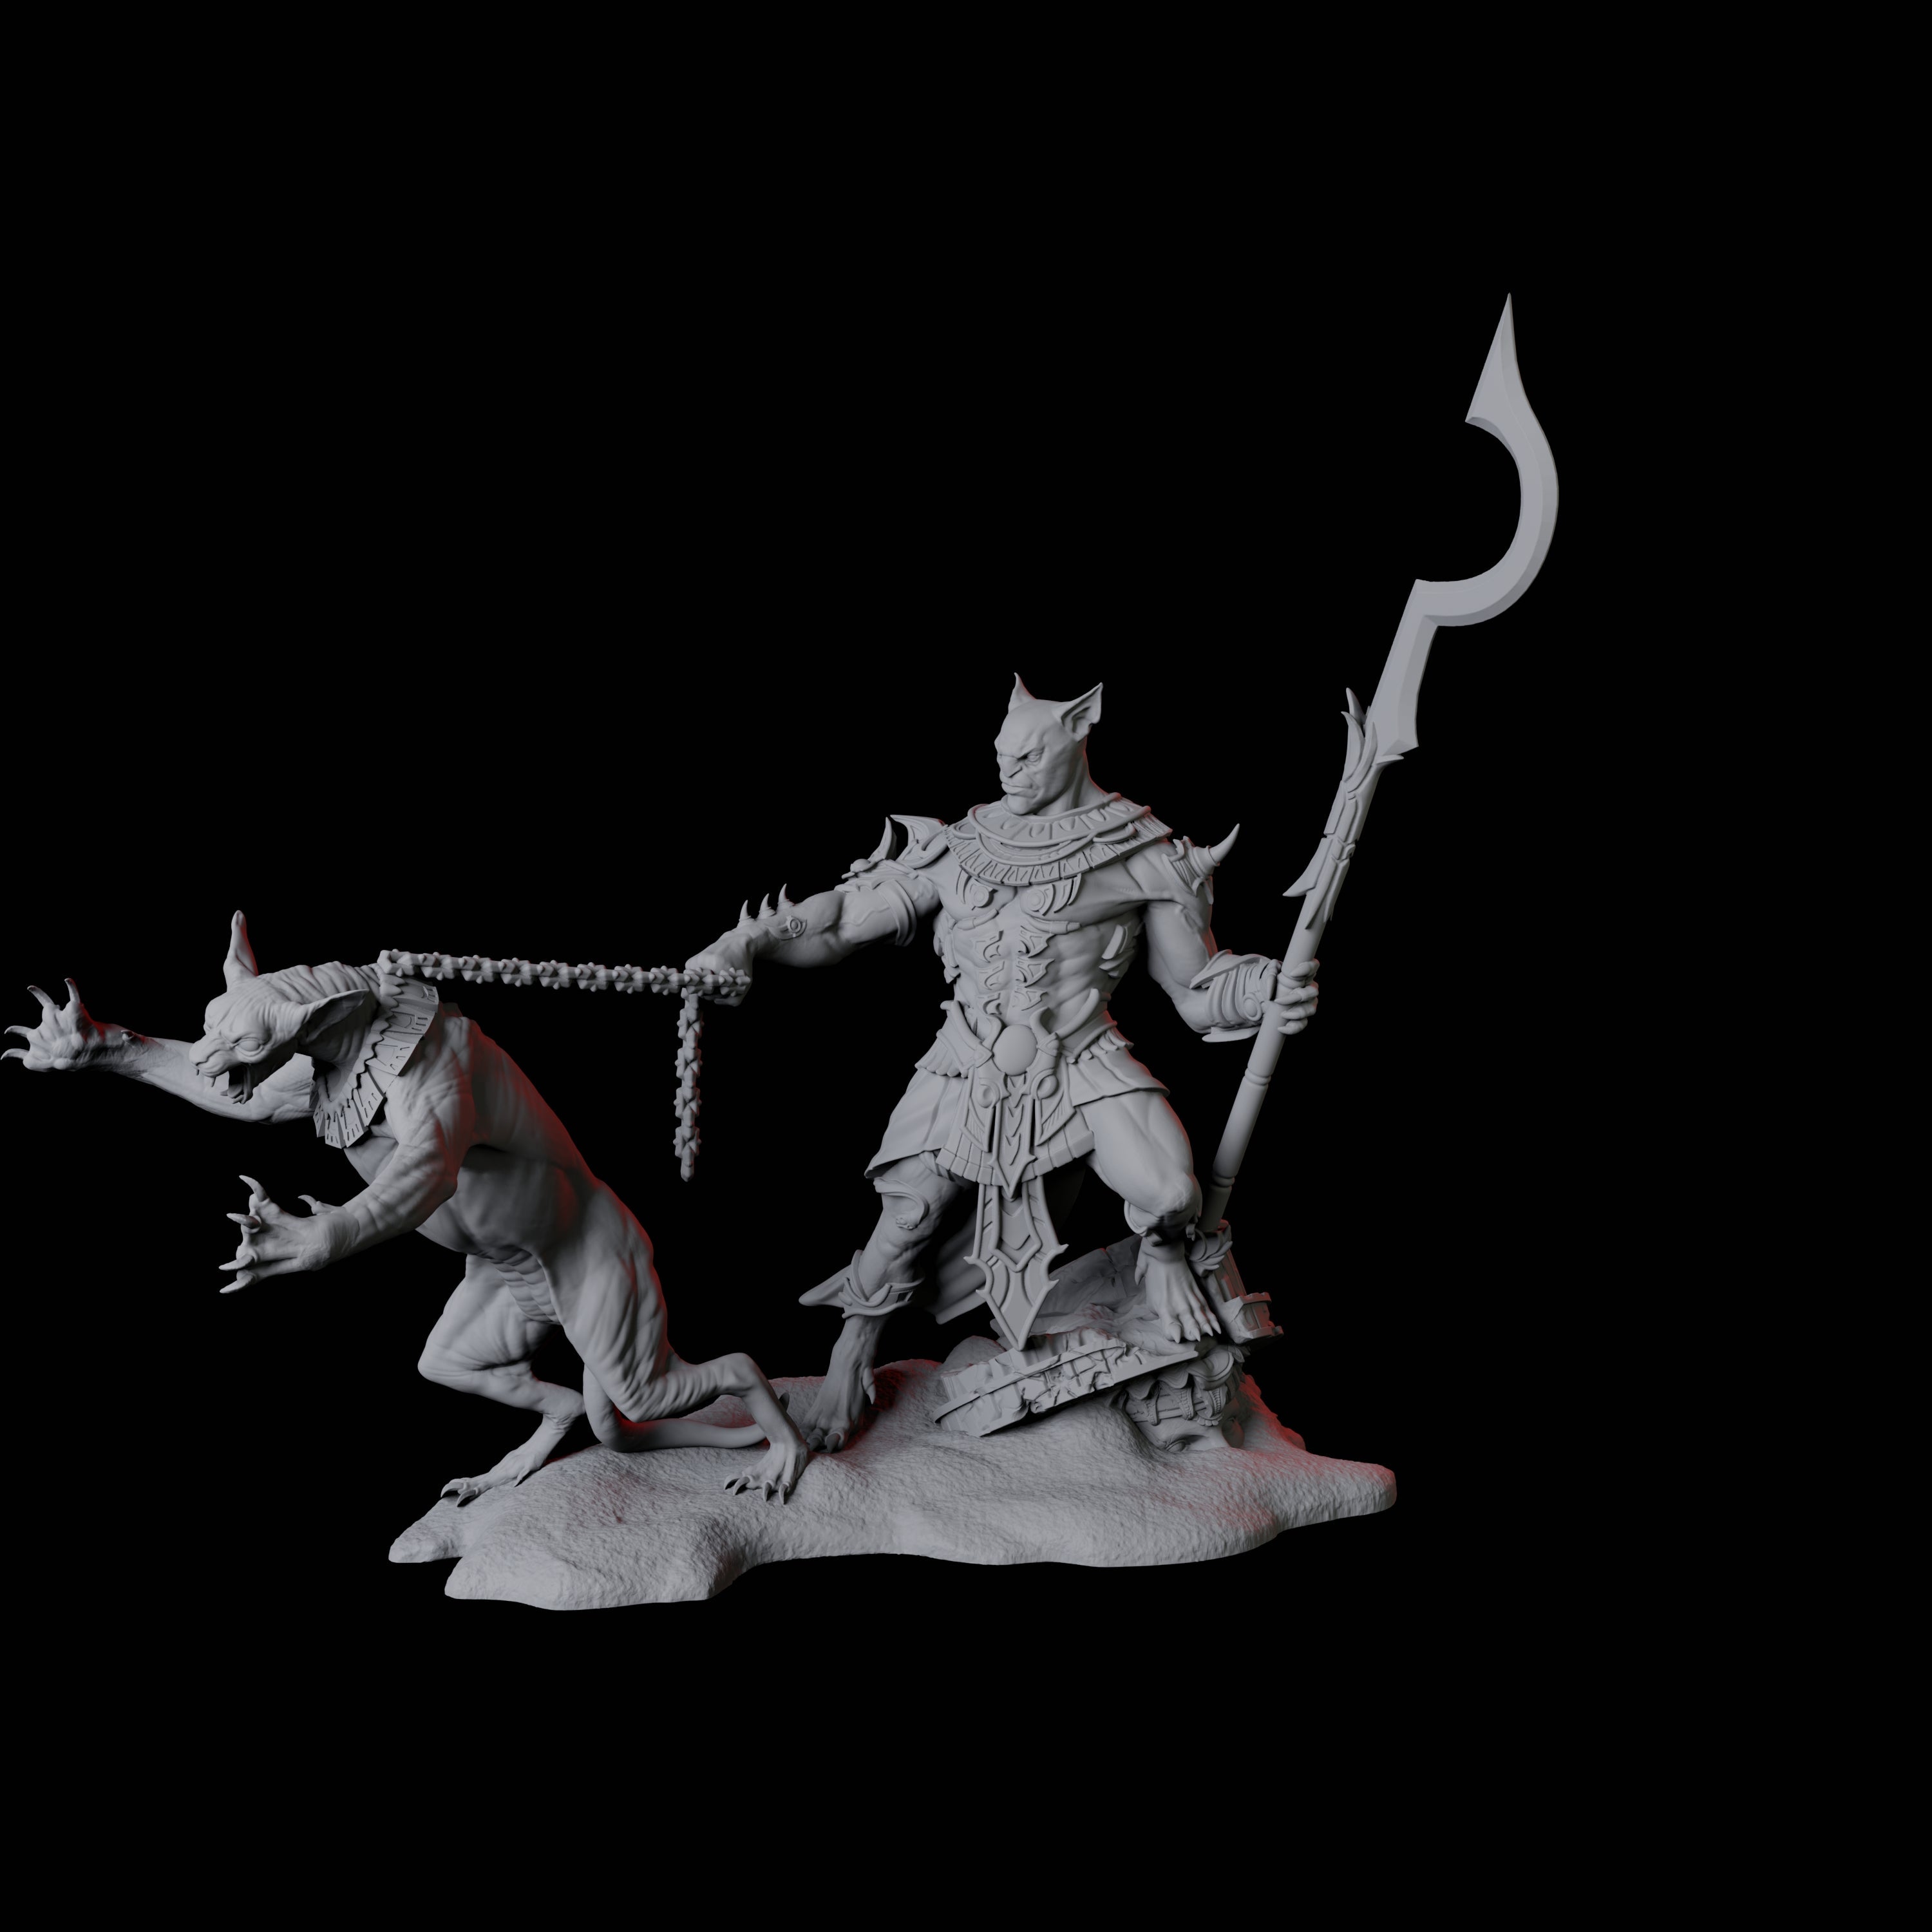 Powerful Tabaxi Warrior A Miniature for Dungeons and Dragons, Pathfinder or other TTRPGs